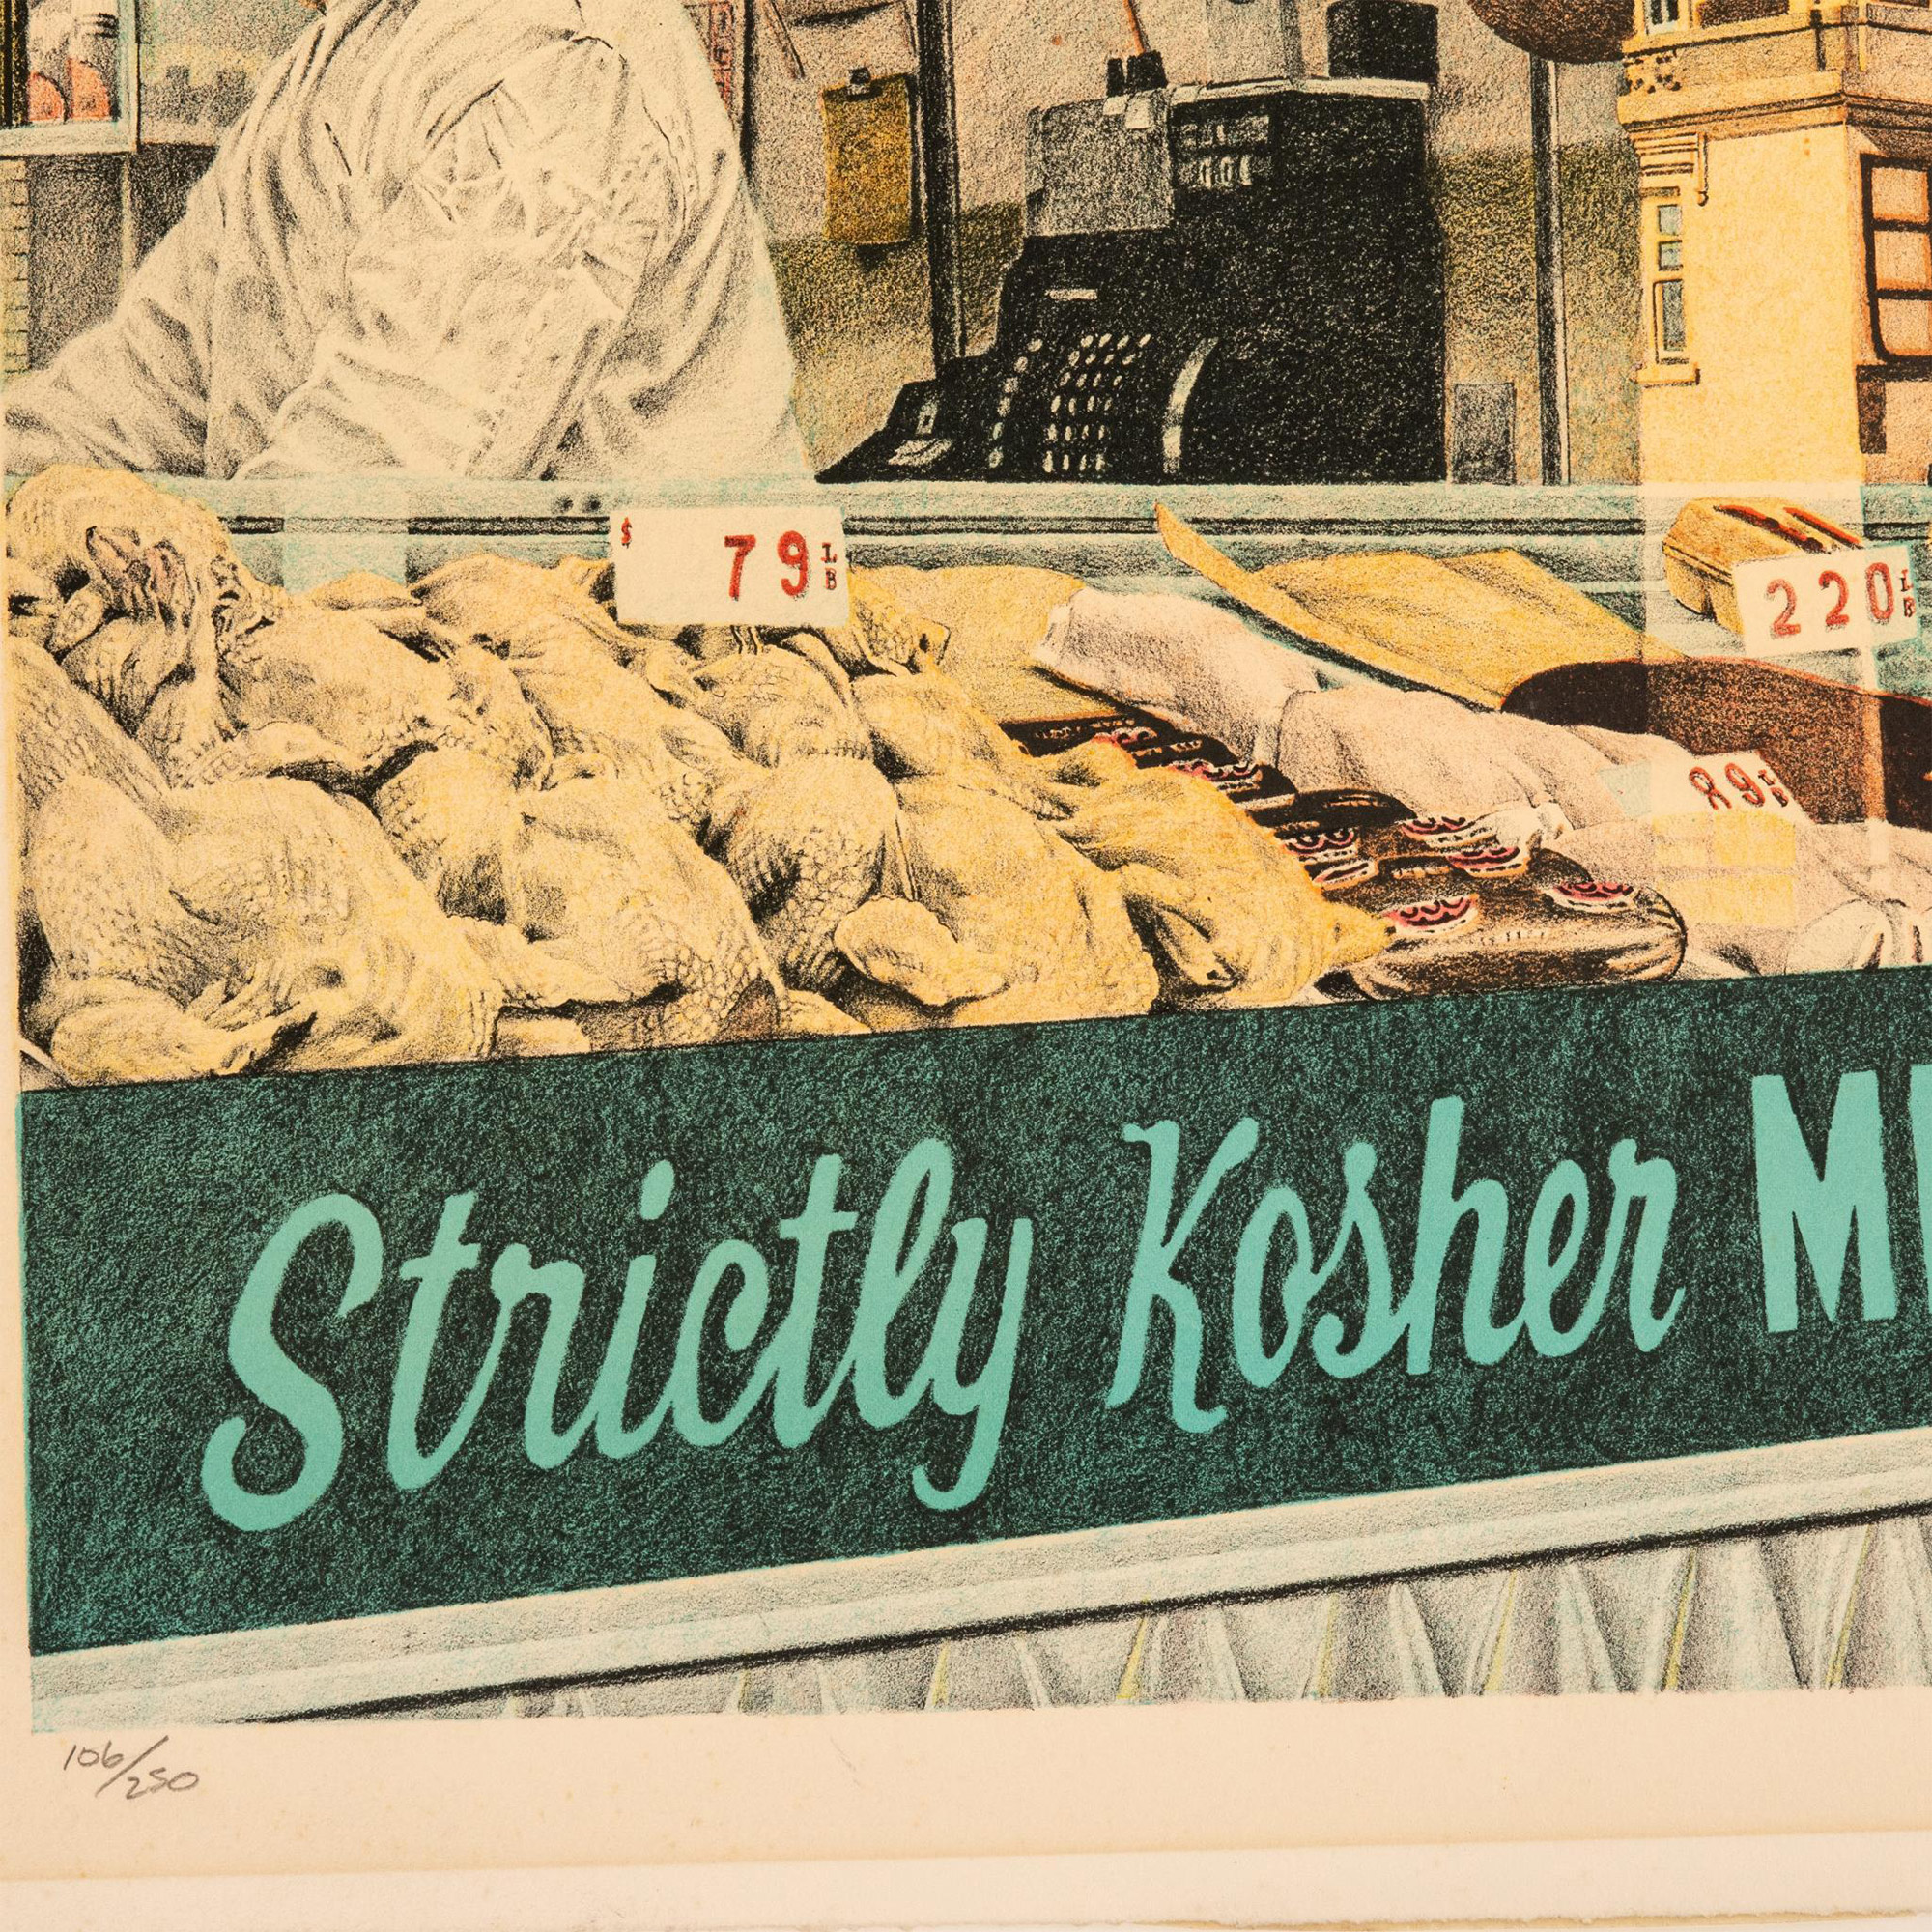 Don Eddy, Original Color Lithograph, Strictly Kosher, Signed - Image 4 of 6